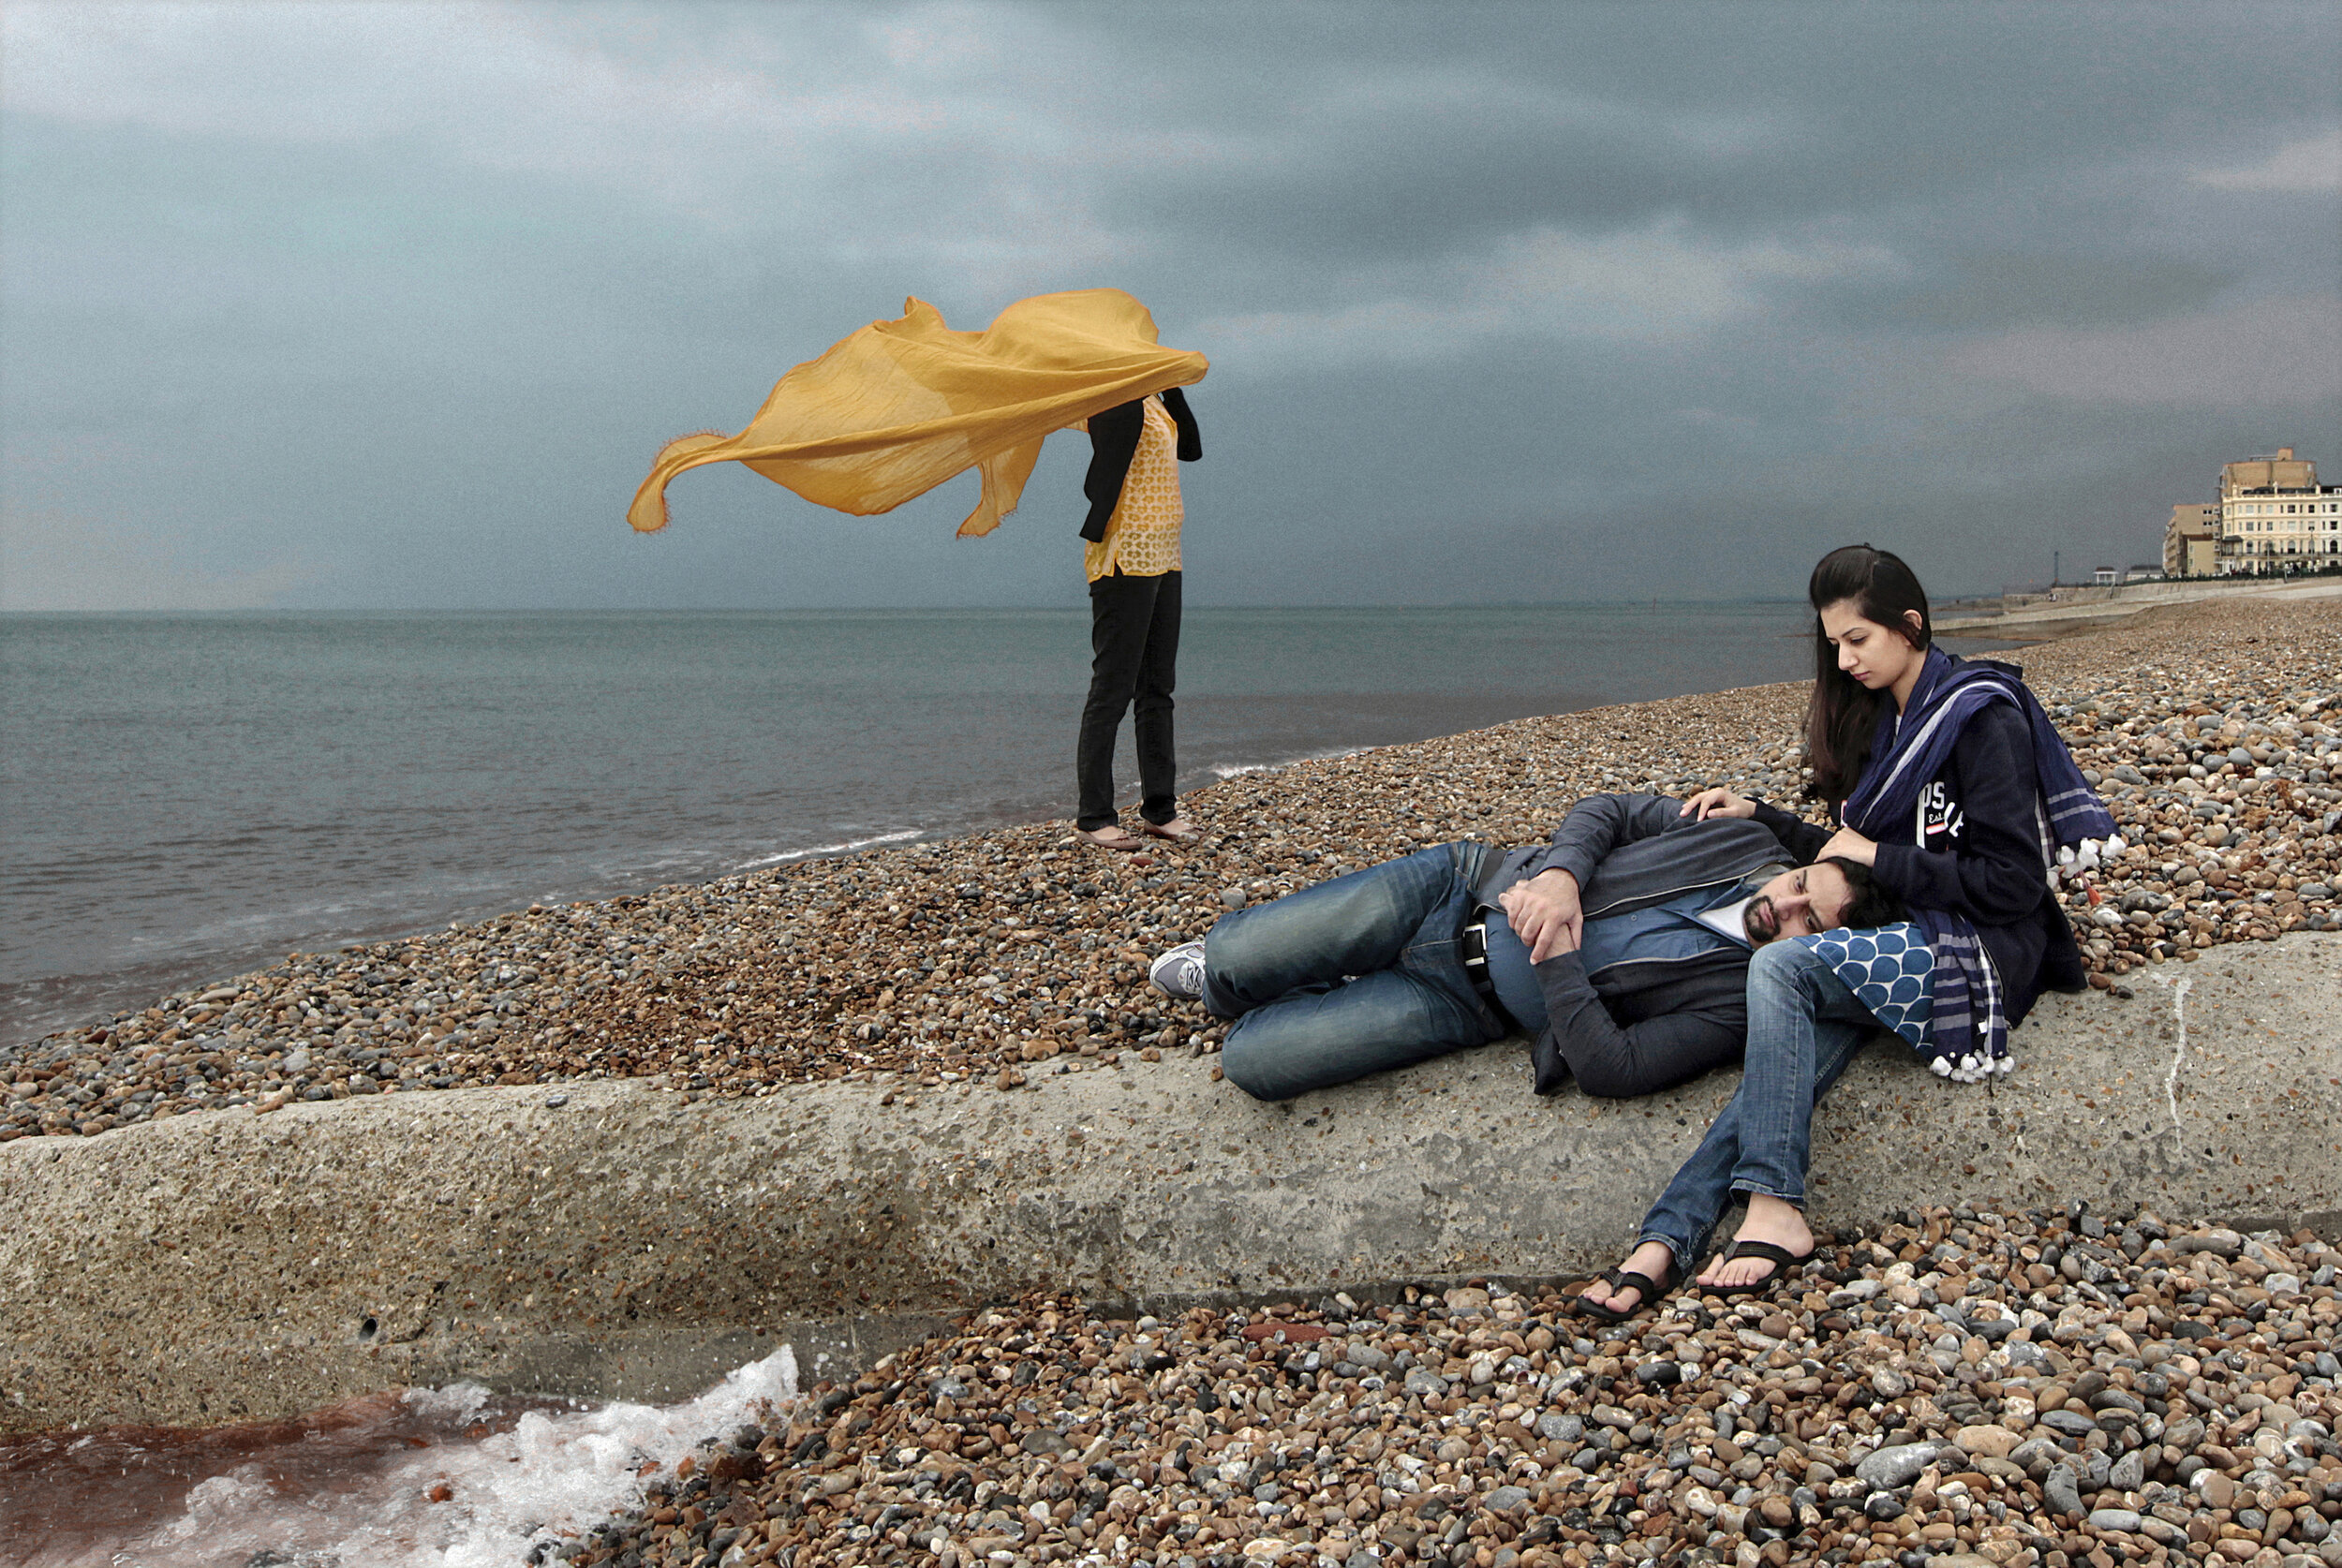   UK. Brighton. 2012. Rida Awan [right] and her husband, Omar, share a quiet moment at the Brighton beach on a cloudy Sunday afternoon.        